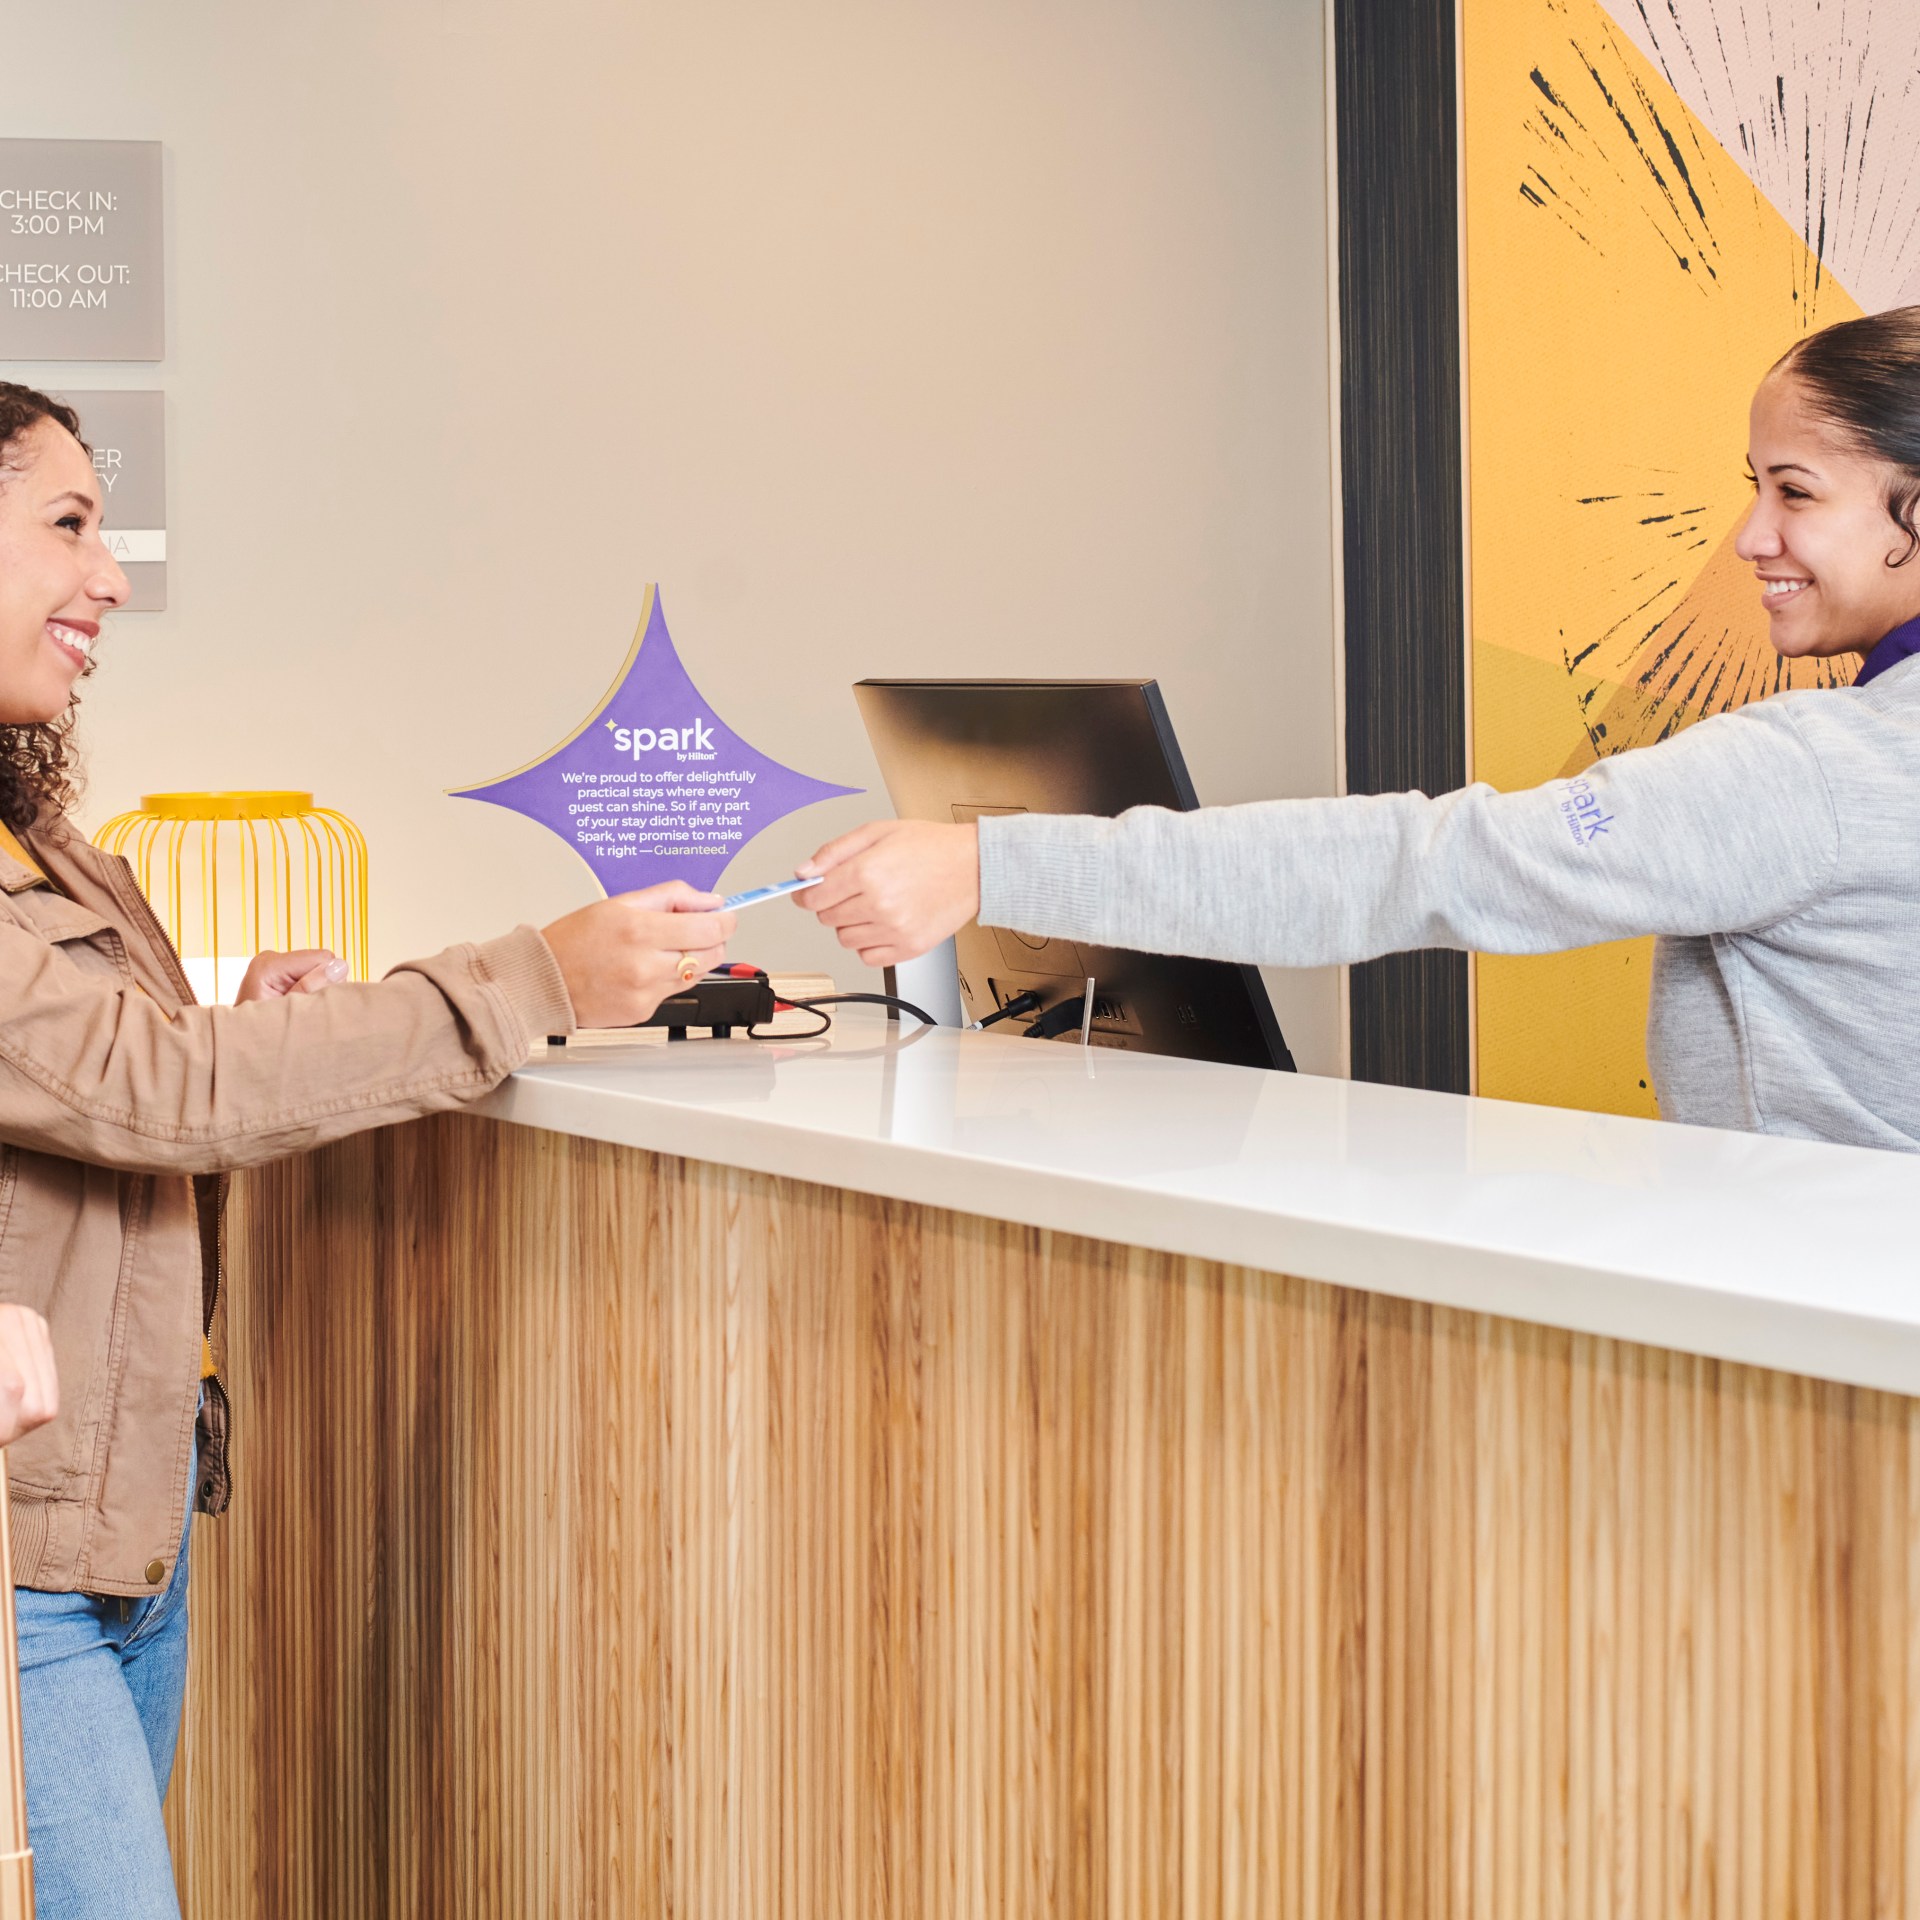 Spark by Hilton Mystic Groton - Grand Opening Guest Check-In